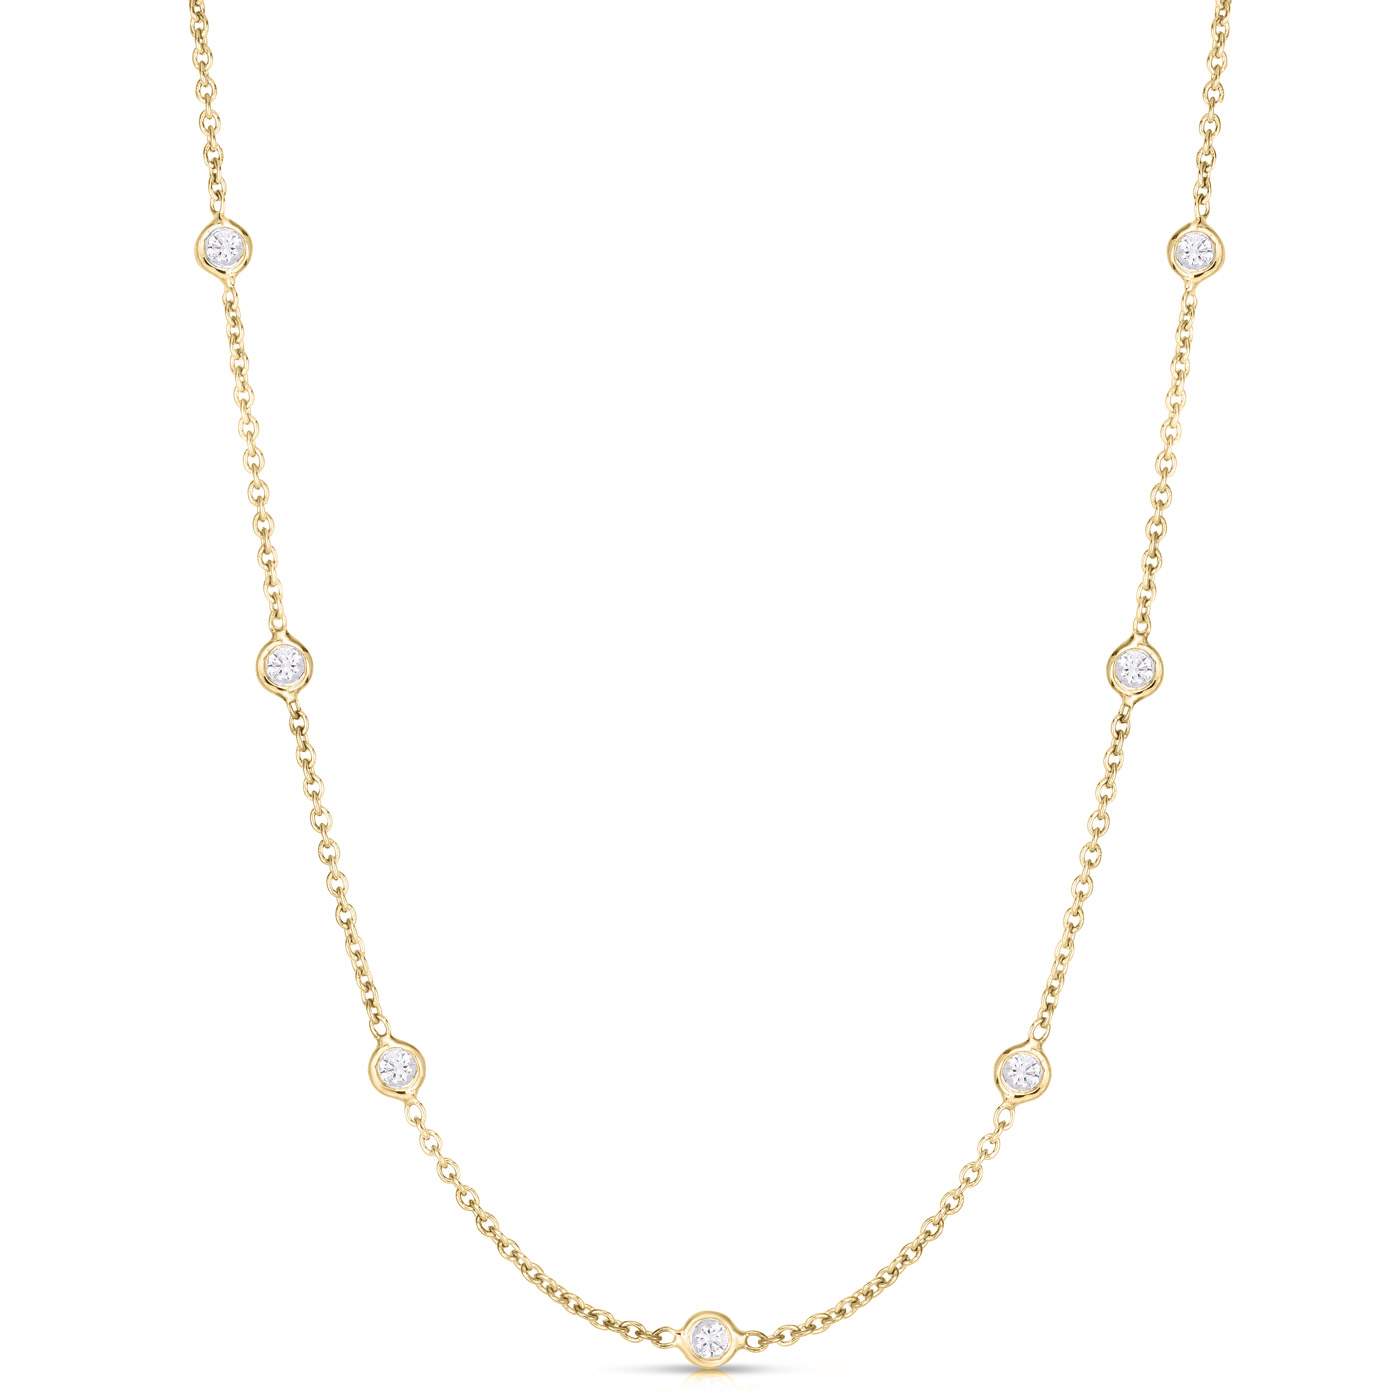 ROBERTO COIN STATION NECKLACE - Provident Jewelry